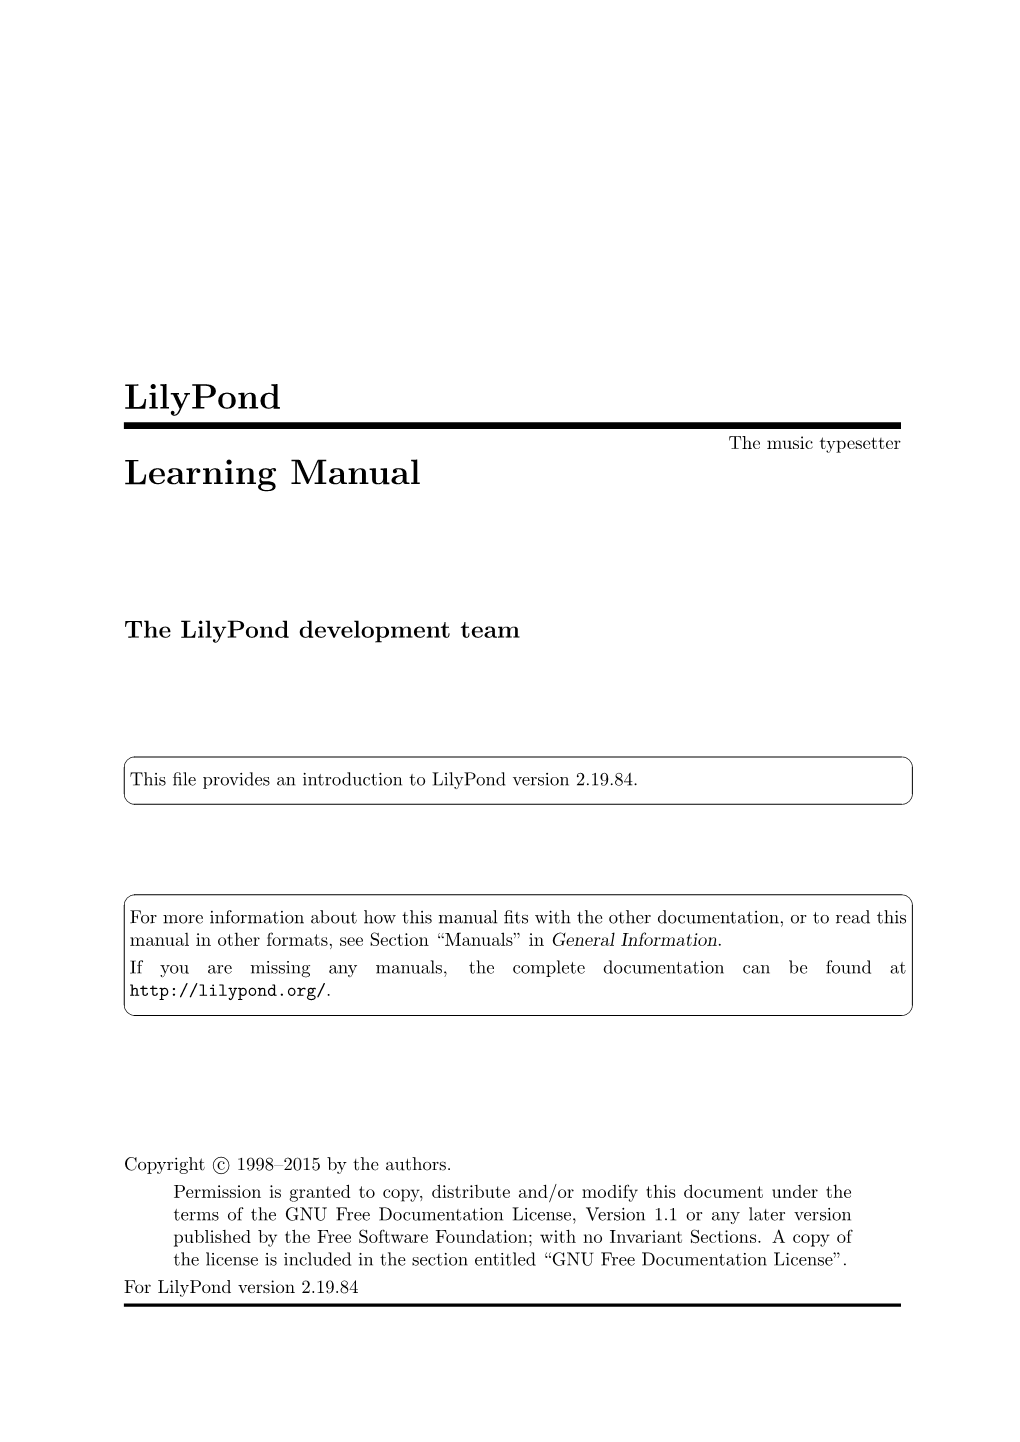 Lilypond Learning Manual